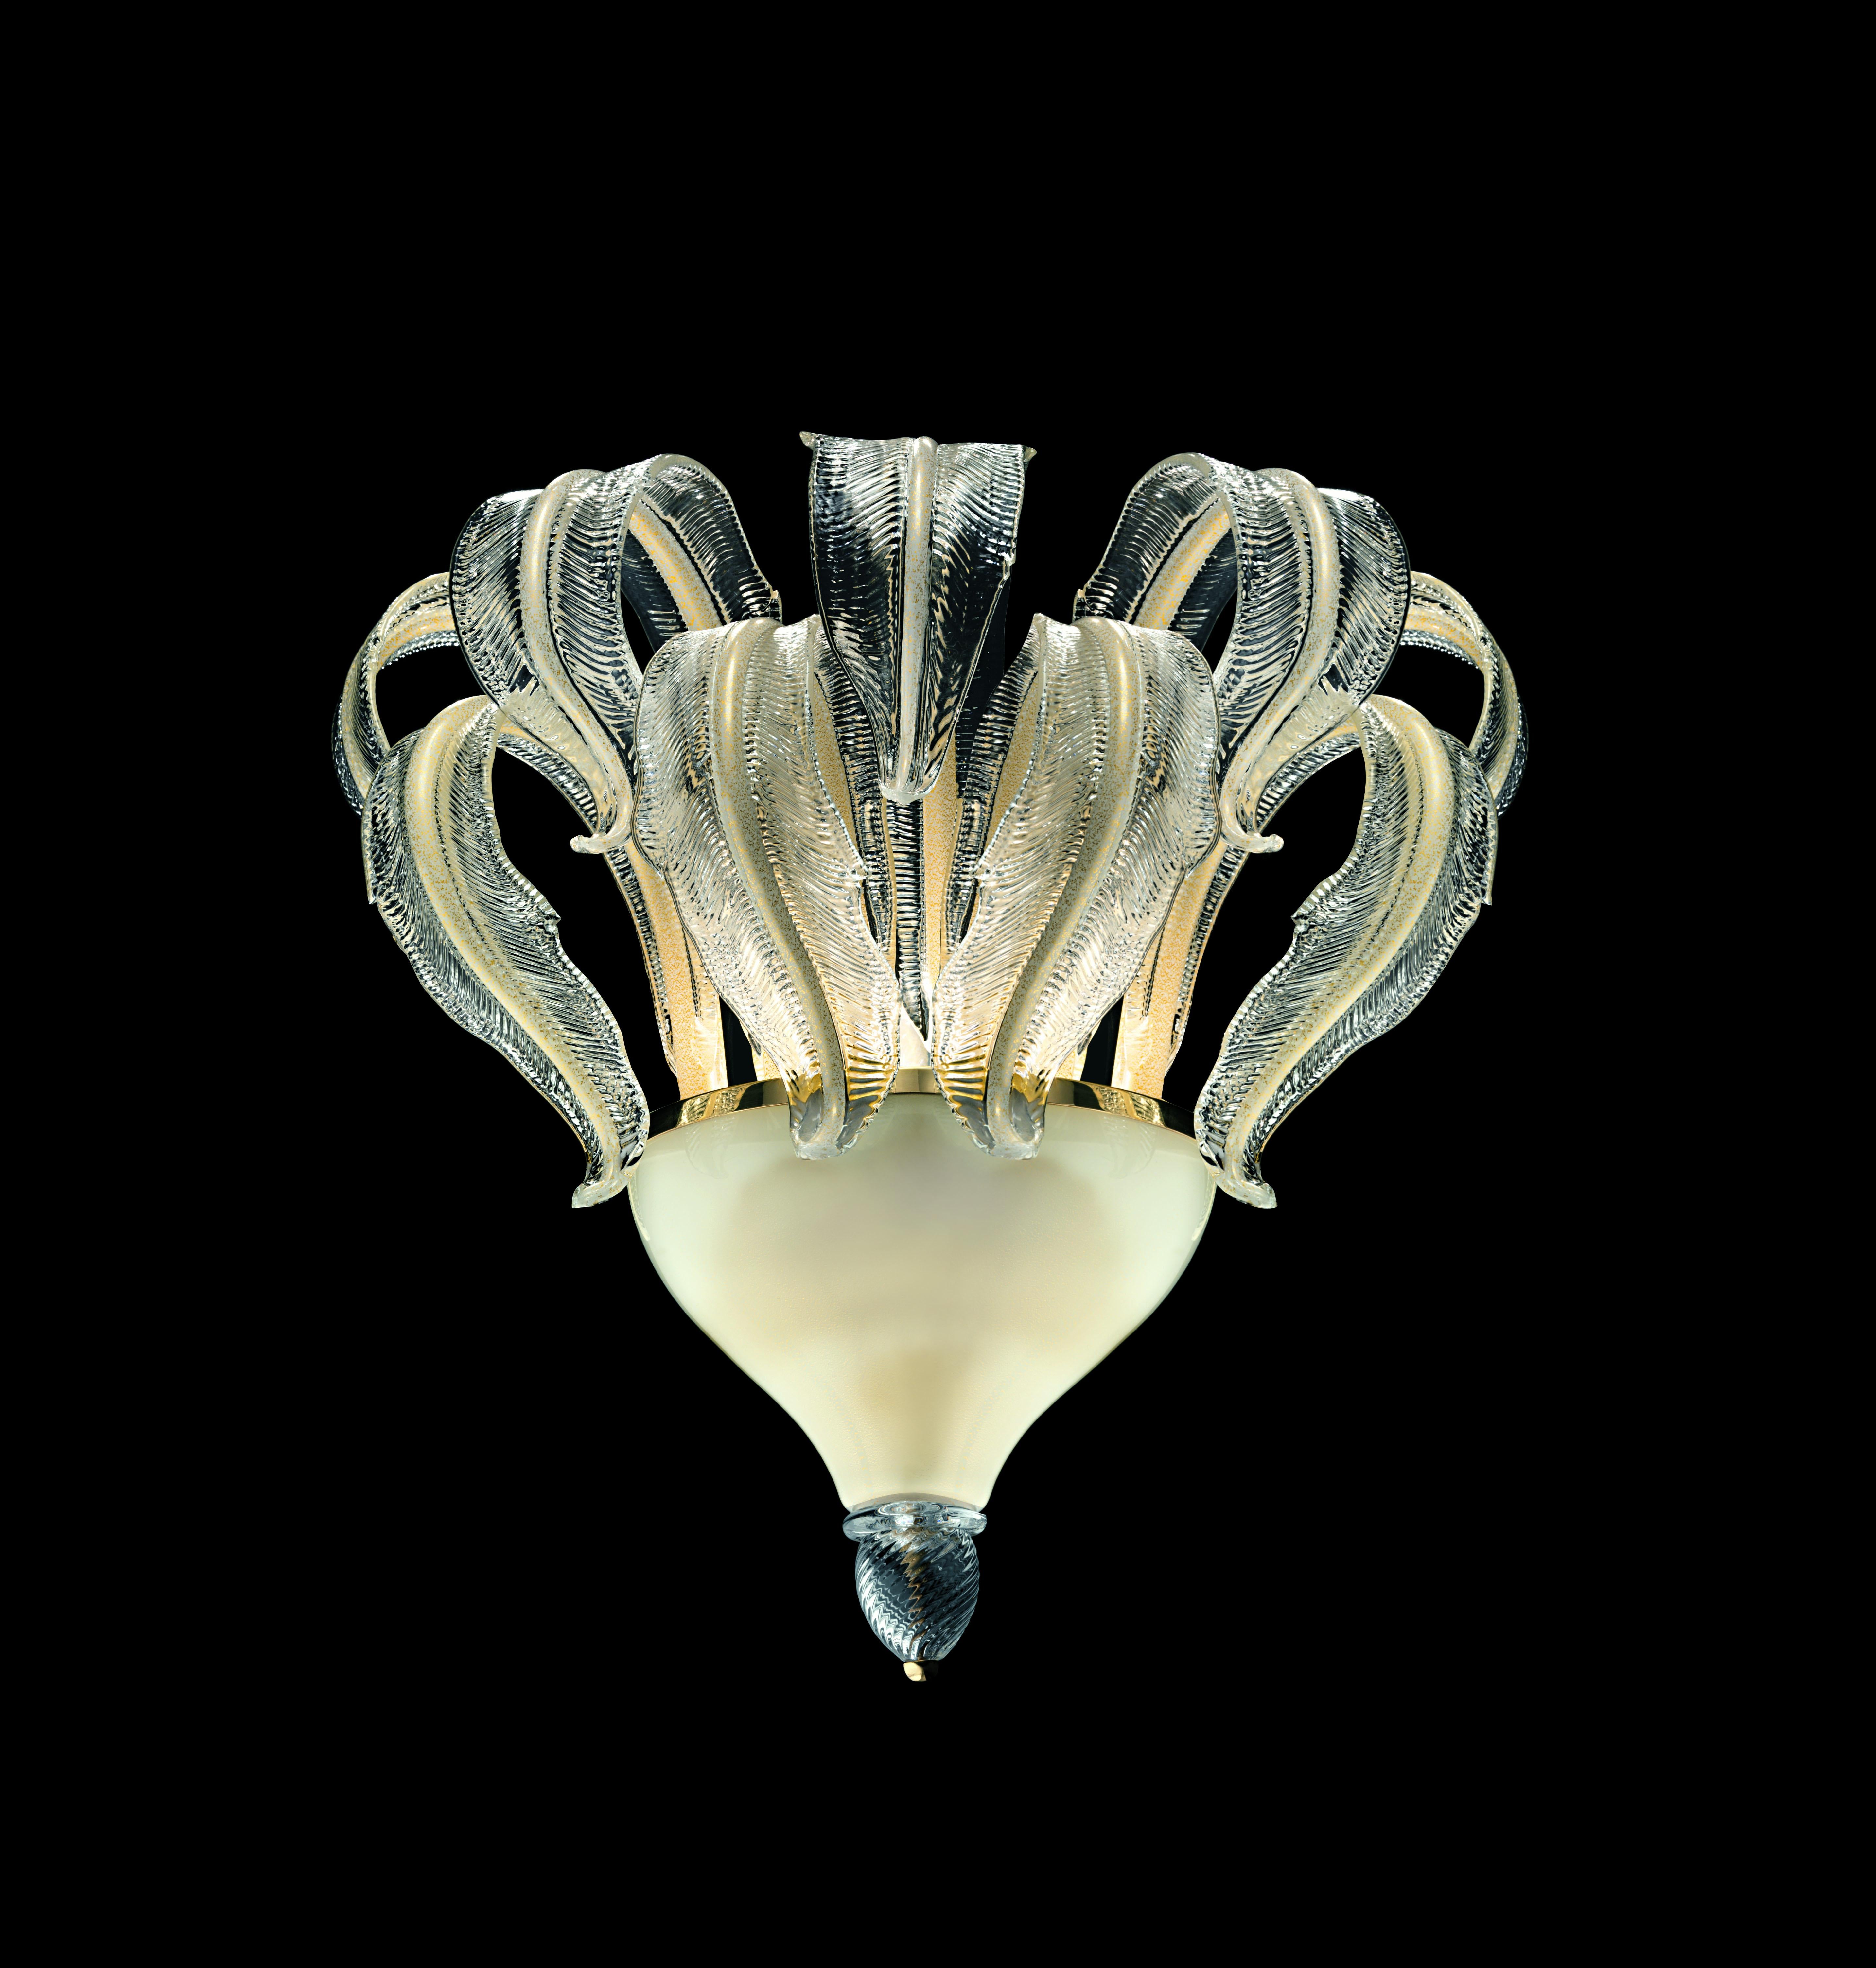 Modern Piume 5391 Wall Sconce in Beige Gold Glass, by Barovier&Toso